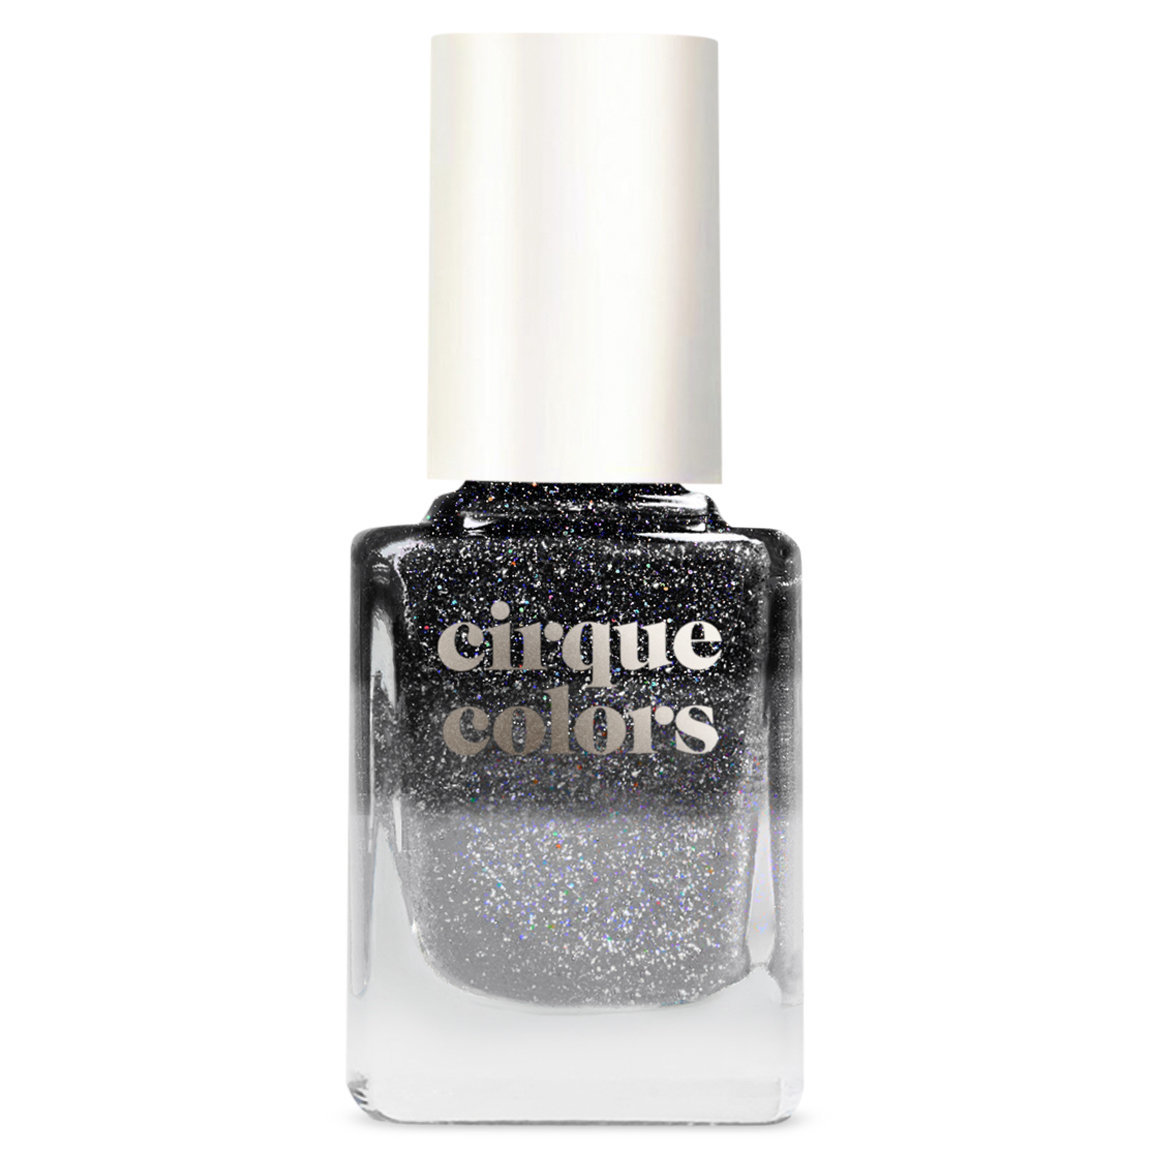 Cirque Colors Thermal Nail Polish Witching Hour alternative view 1 - product swatch.